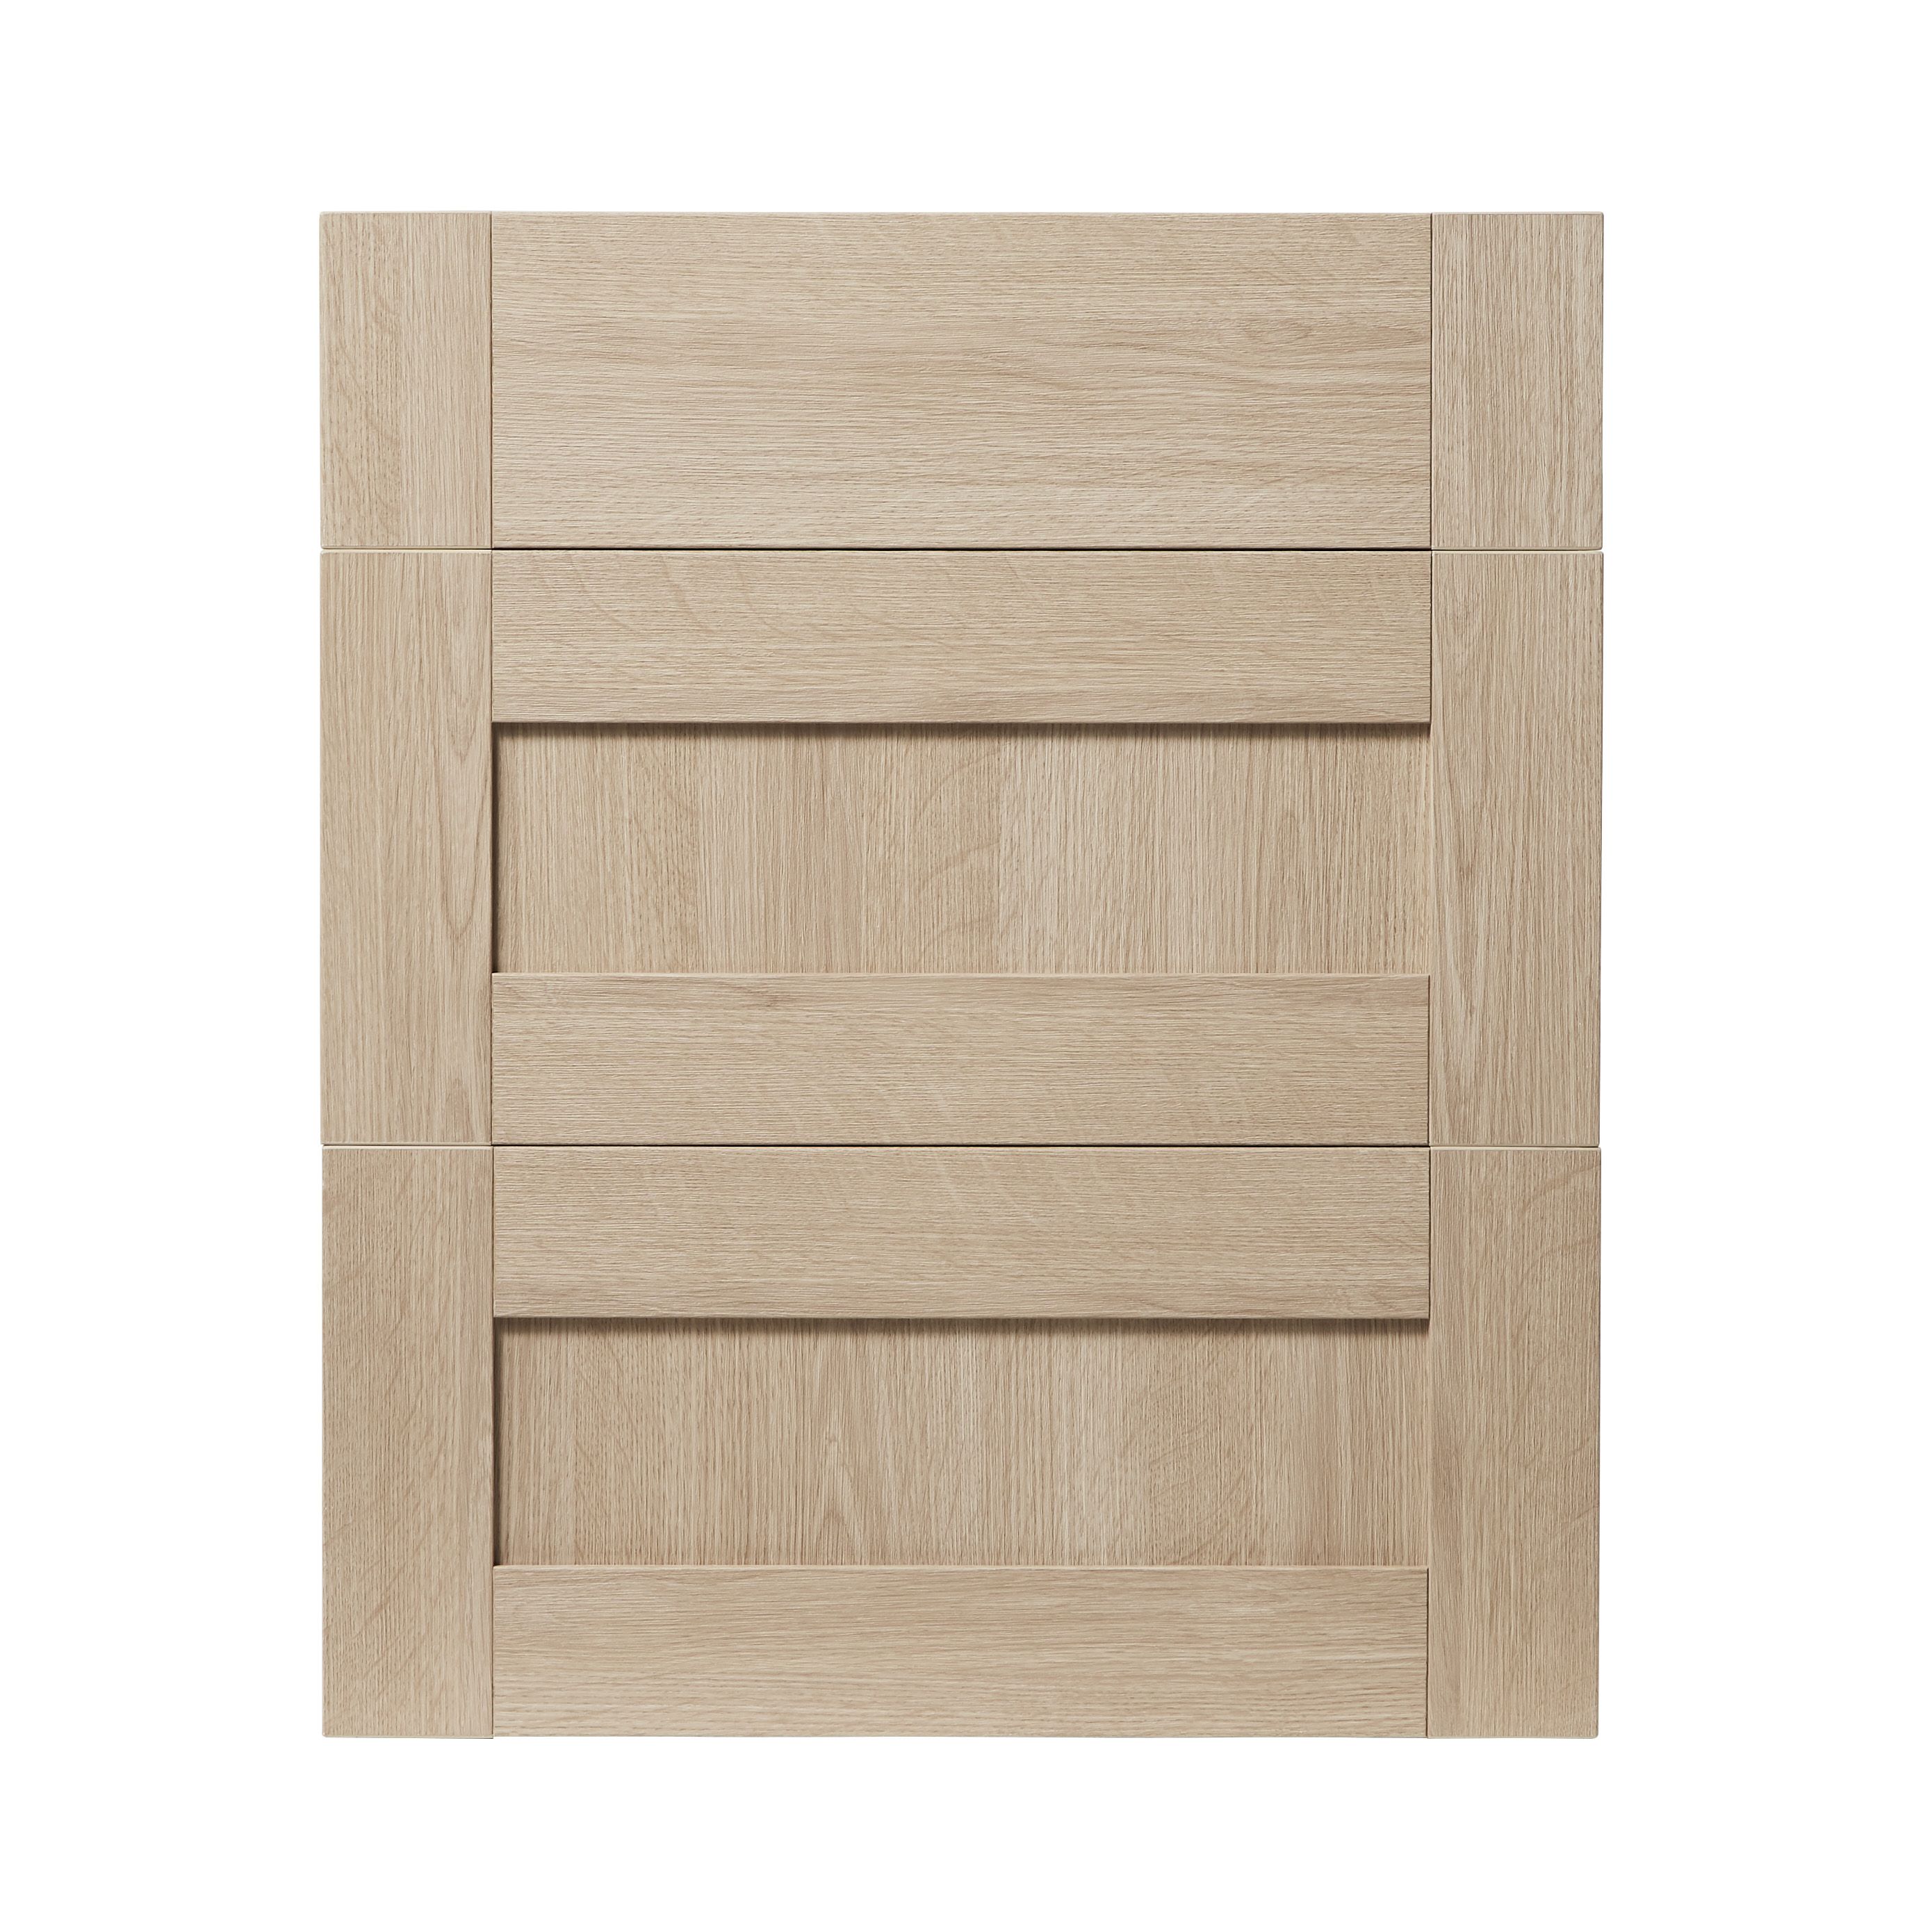 GoodHome Alpinia Oak effect shaker Drawer front (W)600mm, Pack of 3